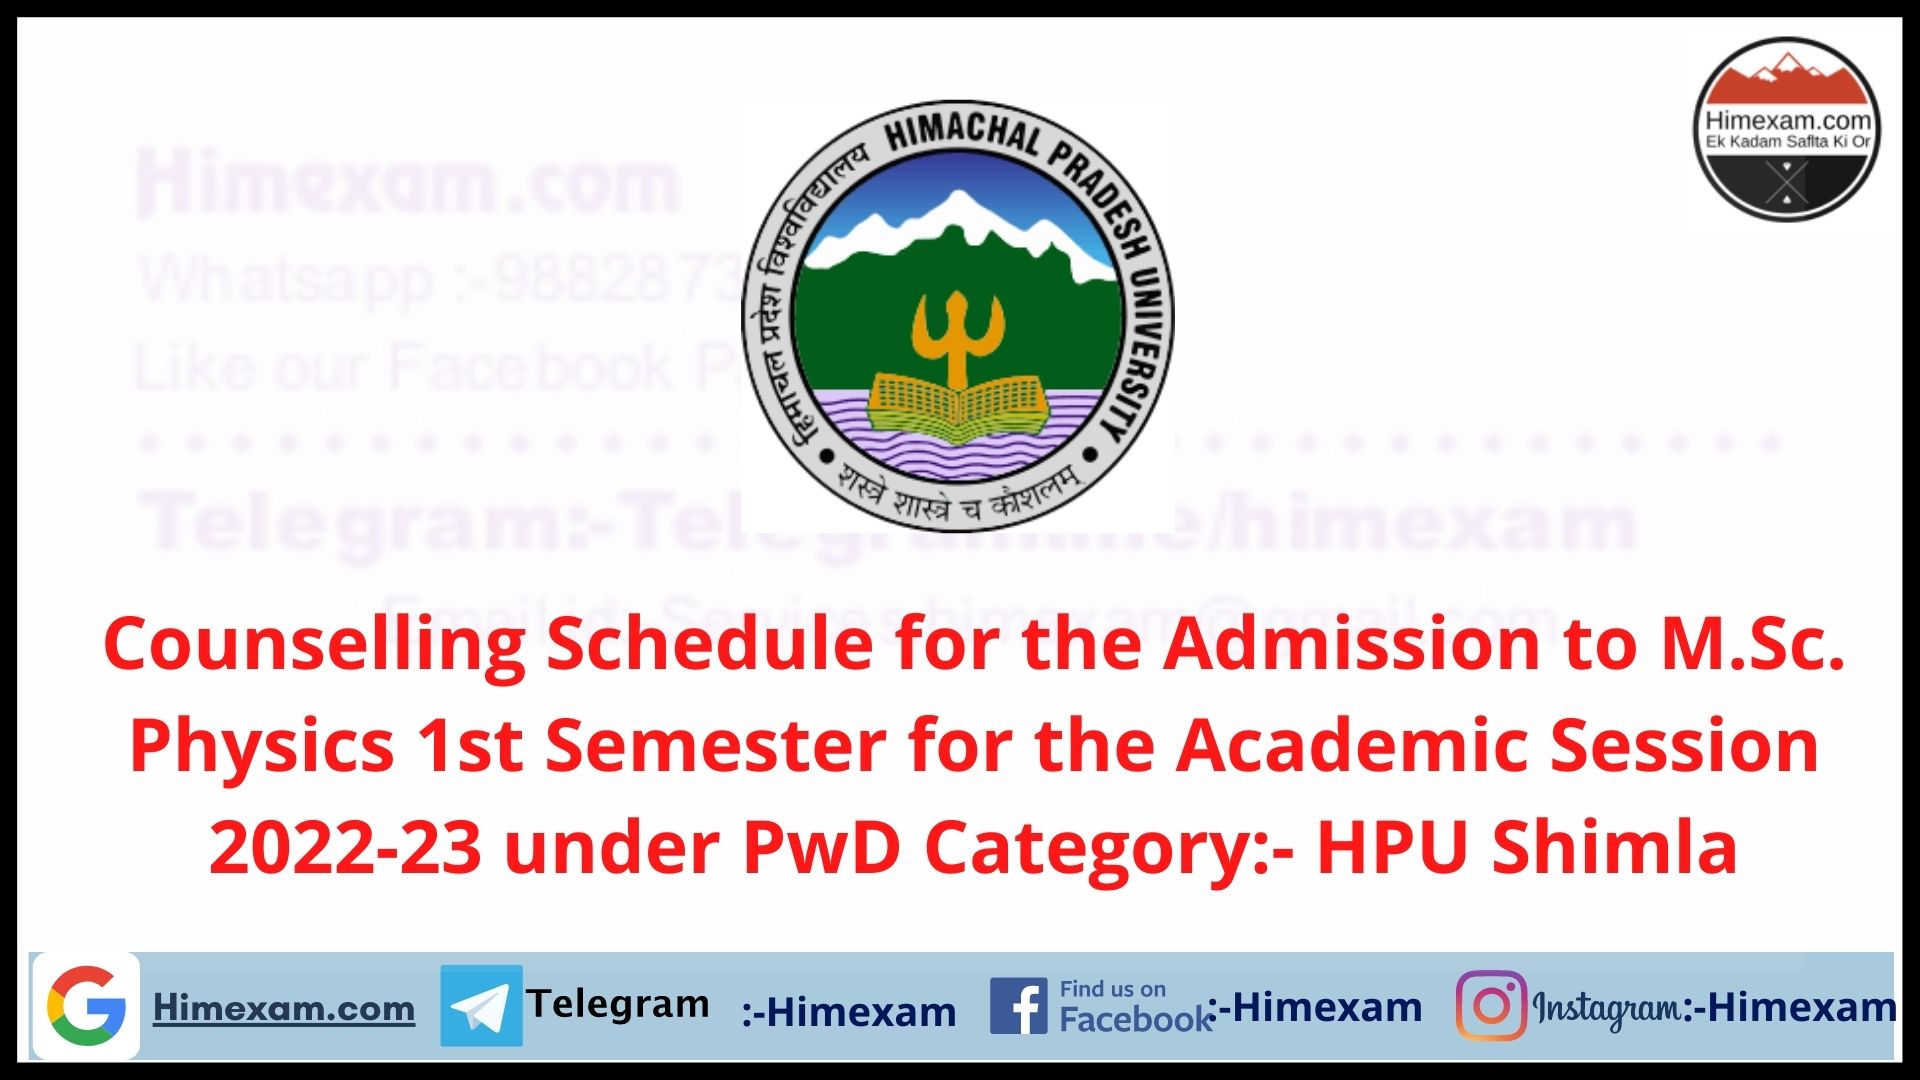 Counselling Schedule for the Admission to M.Sc. Physics 1st Semester for the Academic Session 2022-23 under PwD Category:- HPU Shimla